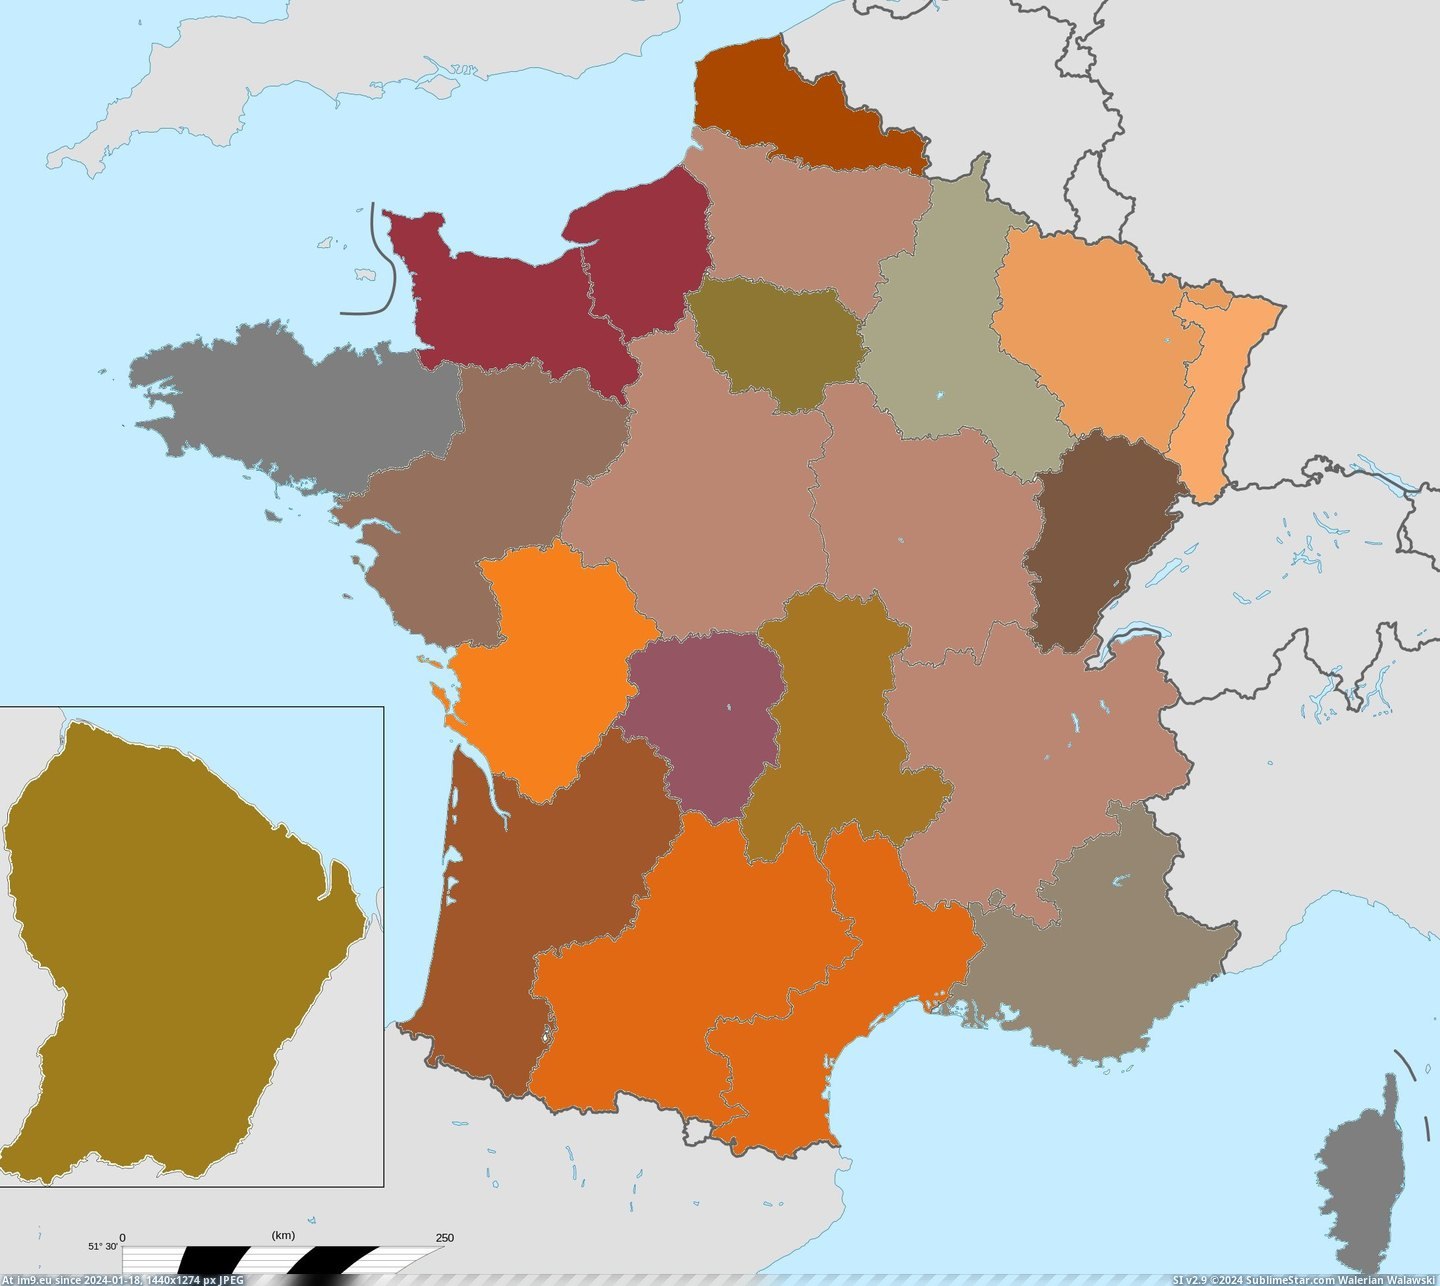 #French #Color #Province #Average #Flag [Mapporn] Average color of each french province's flag [2184x1944] Pic. (Image of album My r/MAPS favs))